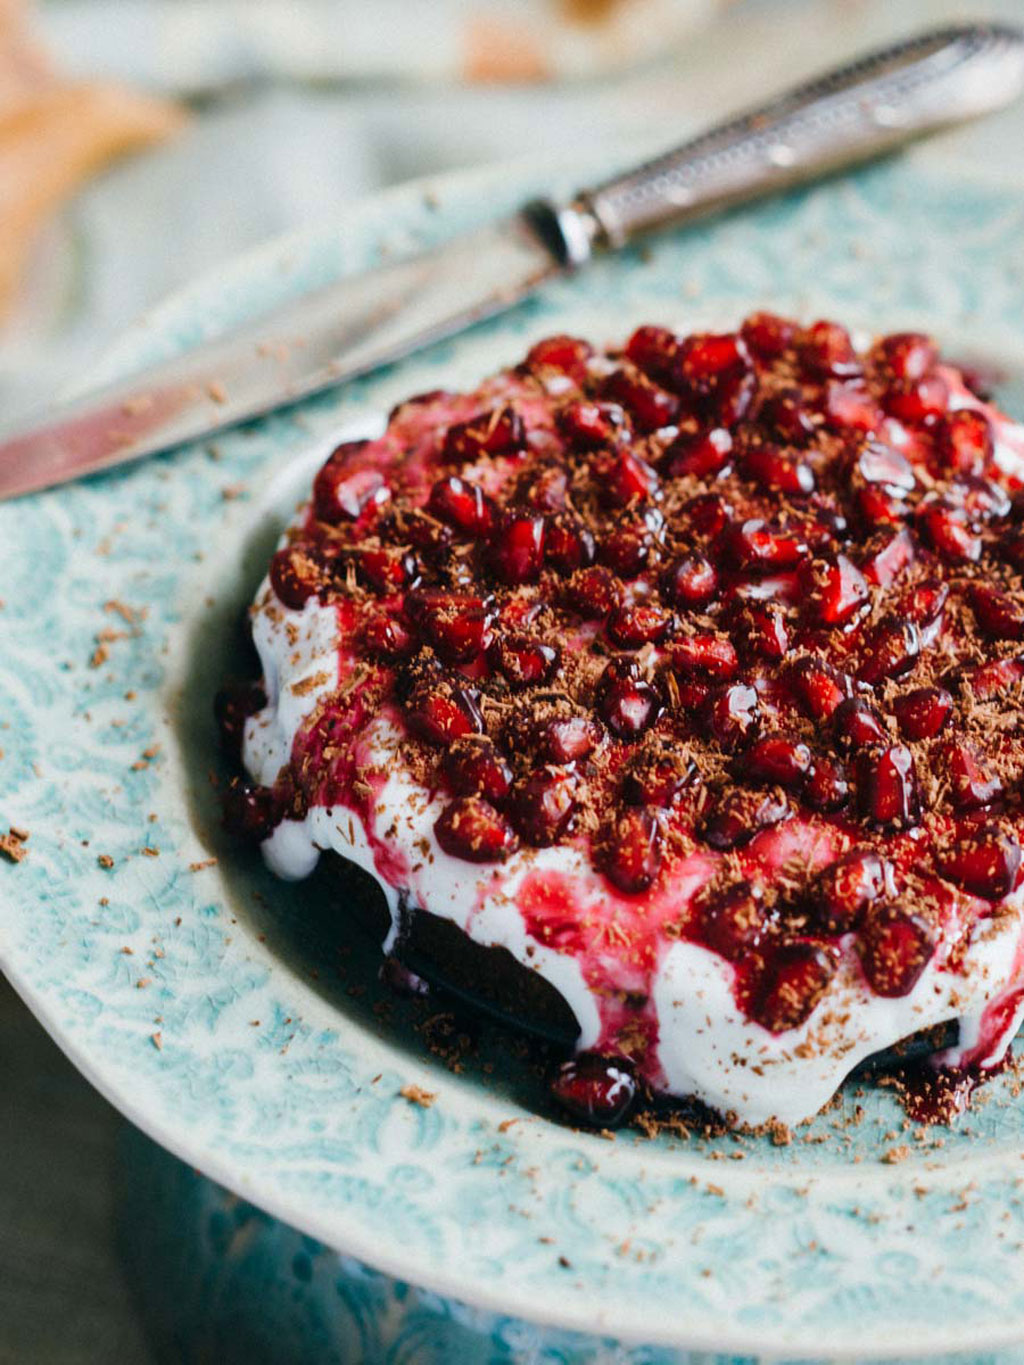 Desserts with Pomegranate